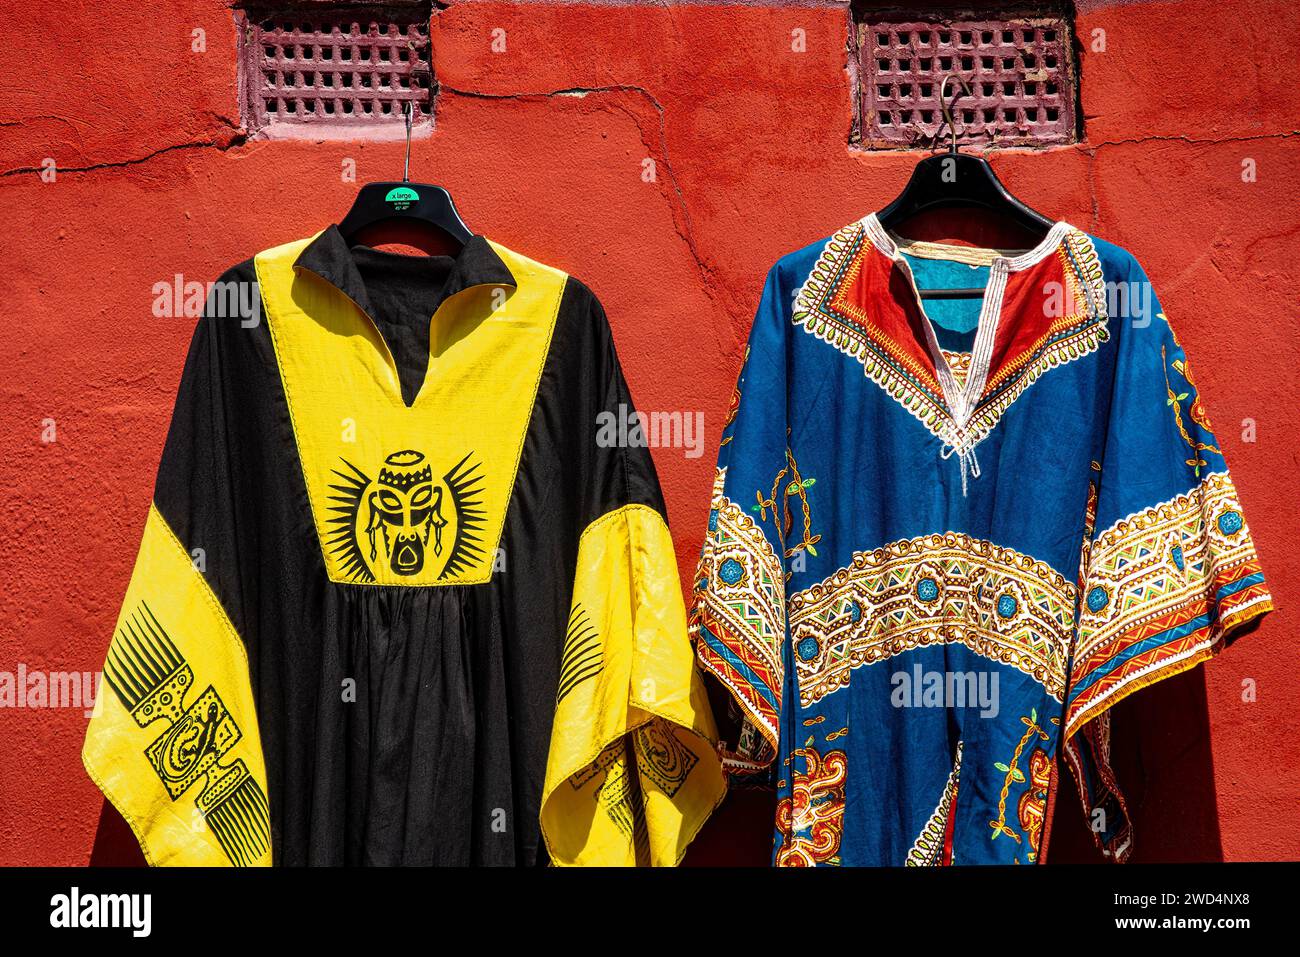 Kaftans on display for sale at outdoor market. Stock Photo